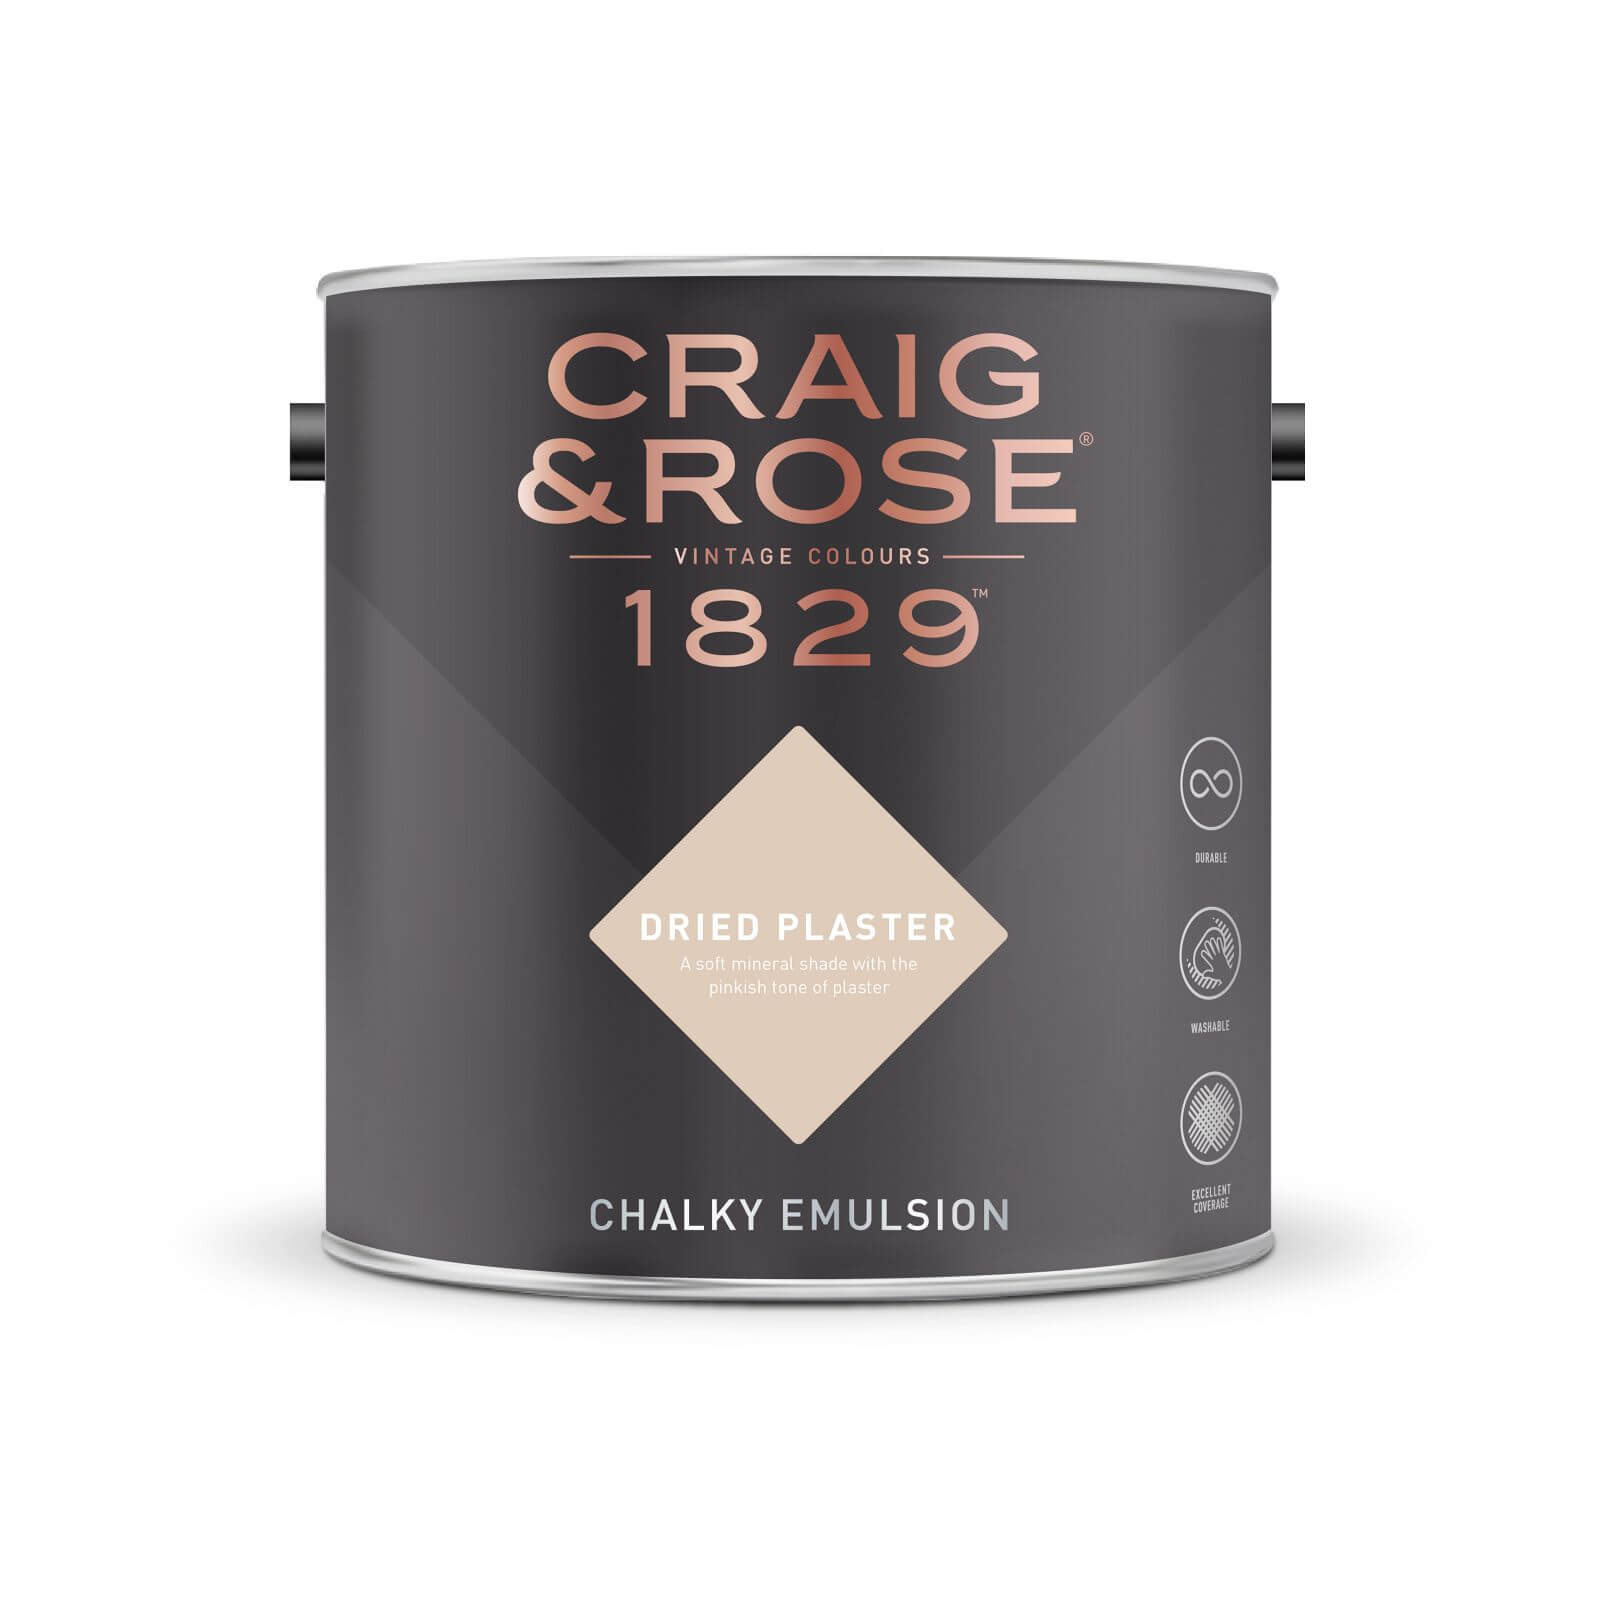 Craig & Rose 1829 Chalky Emulsion Paint Dried Plaster - Tester 50ml